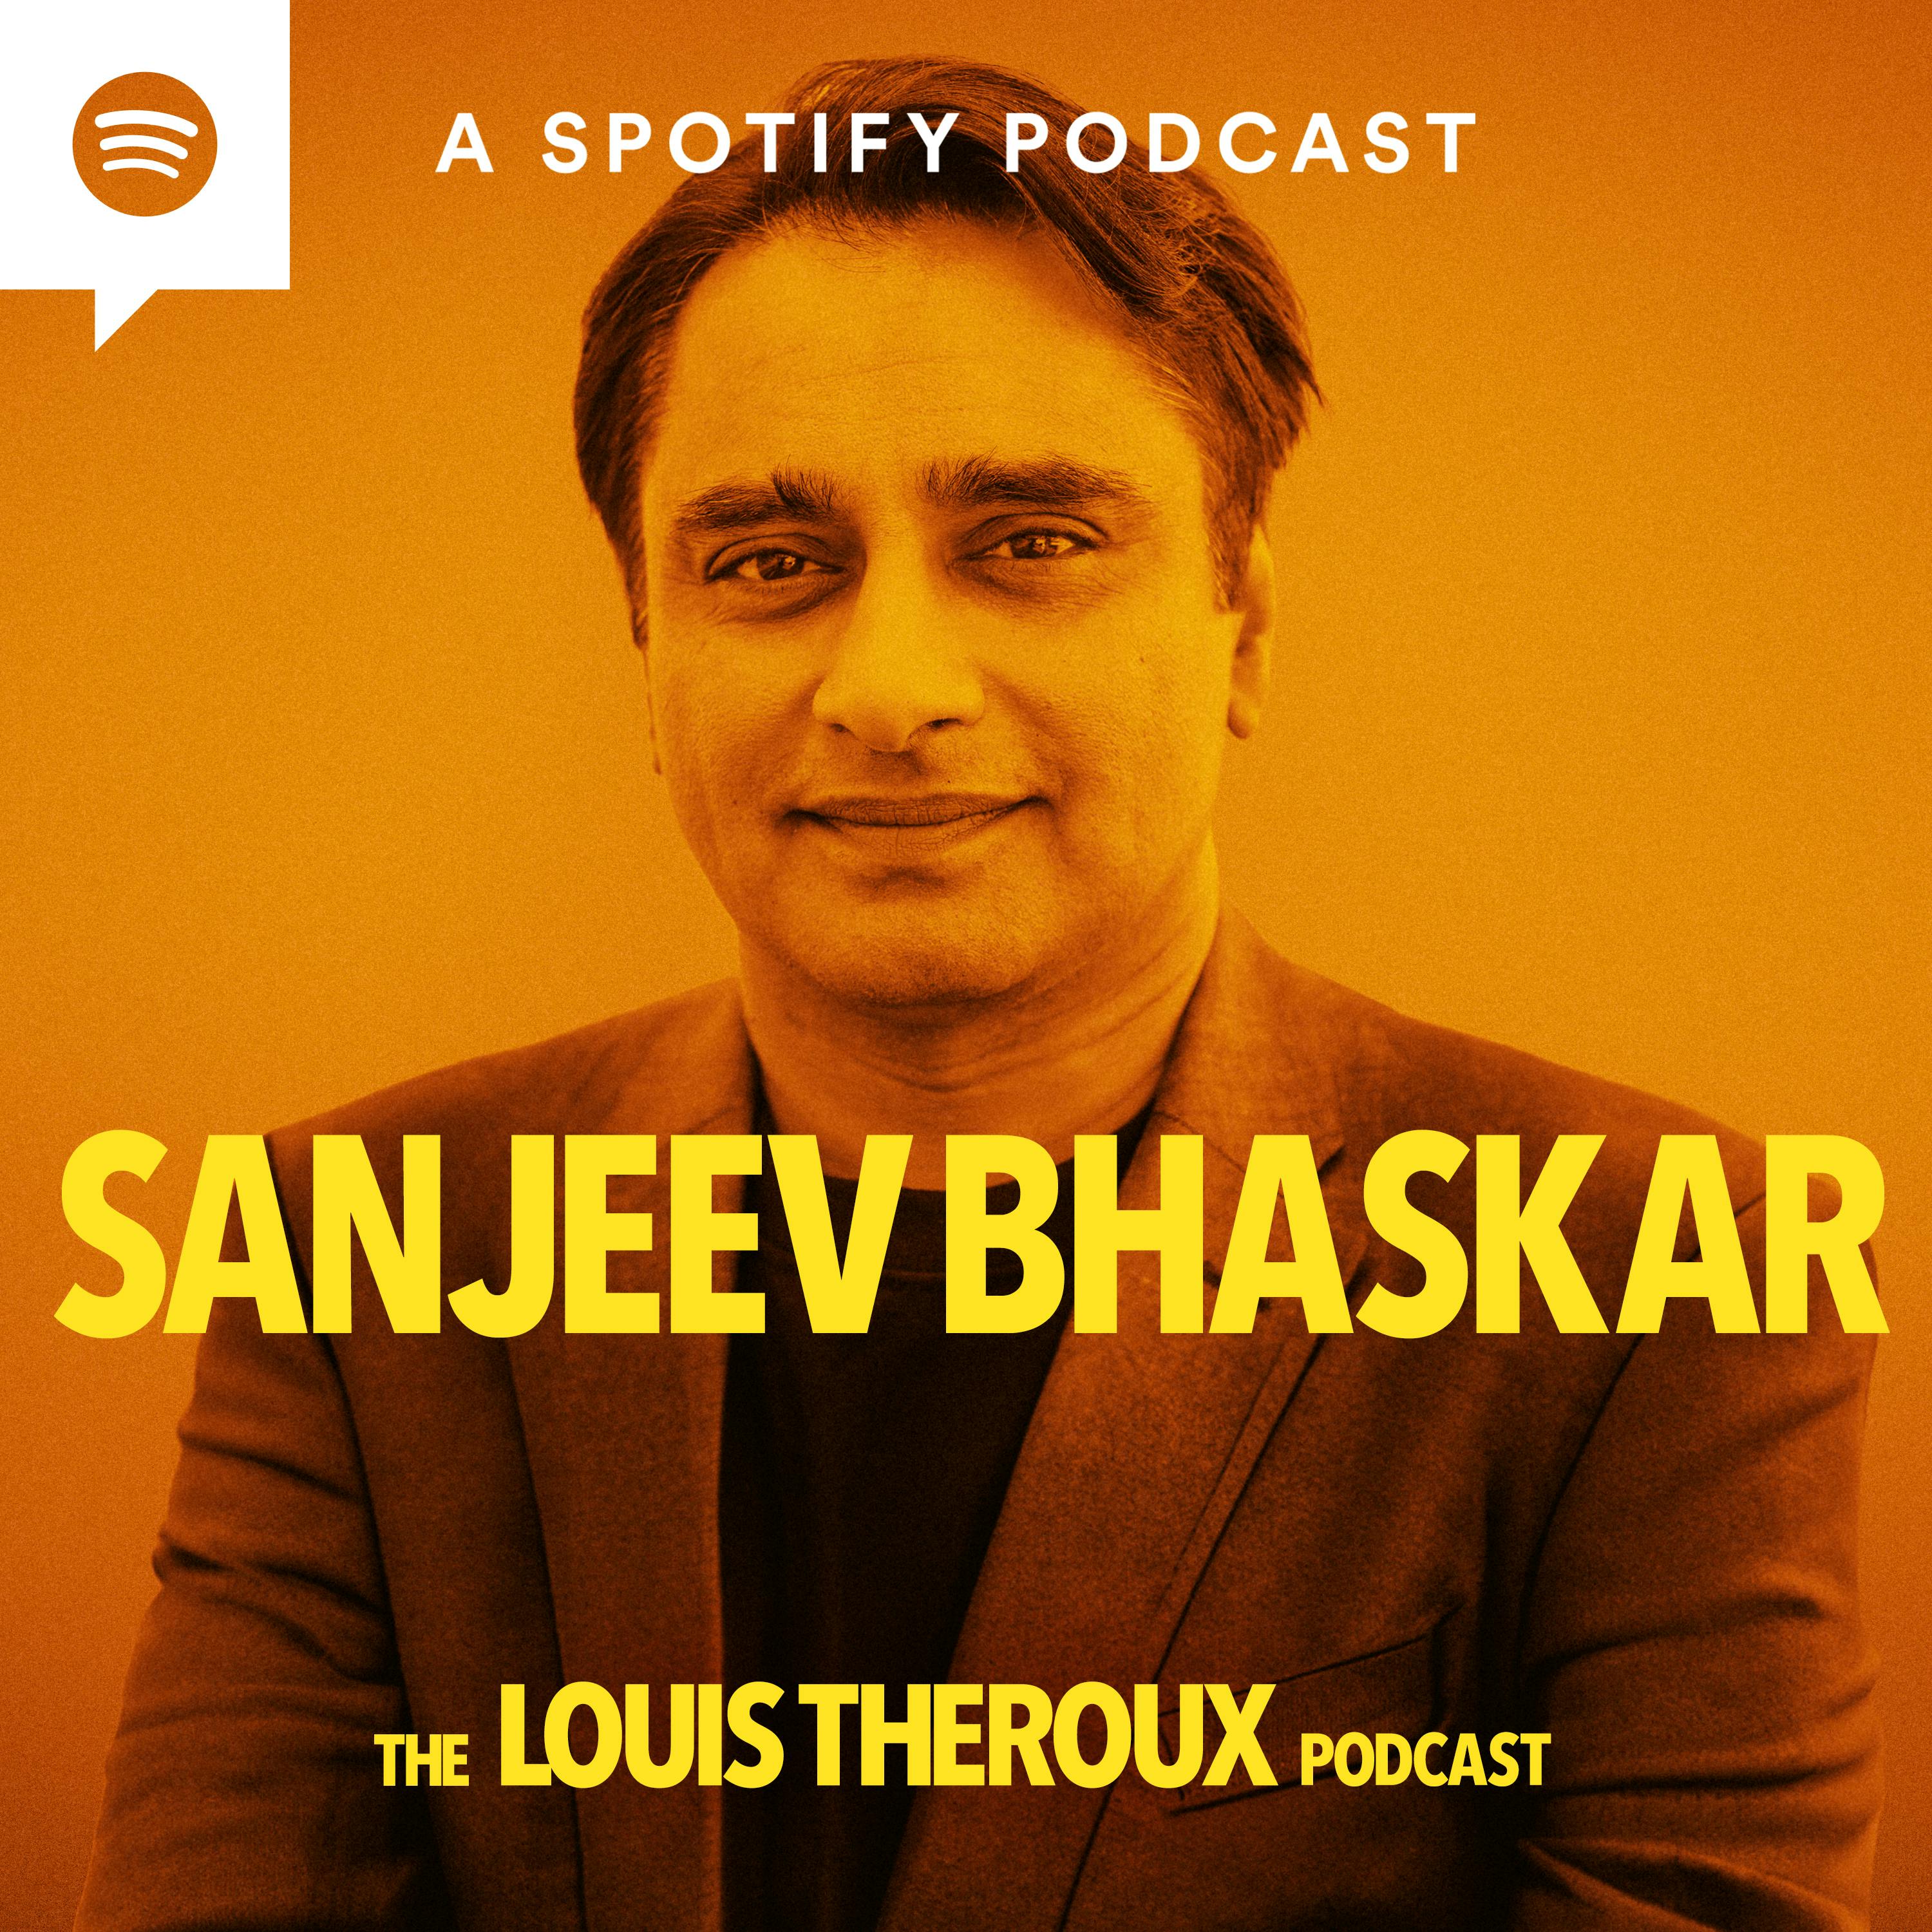 S2 EP6: Sanjeev Bhaskar on his ground-breaking comedy show The Kumars at No. 42, ’browning up’ in 1970s comedy, and his outrageous rider demands